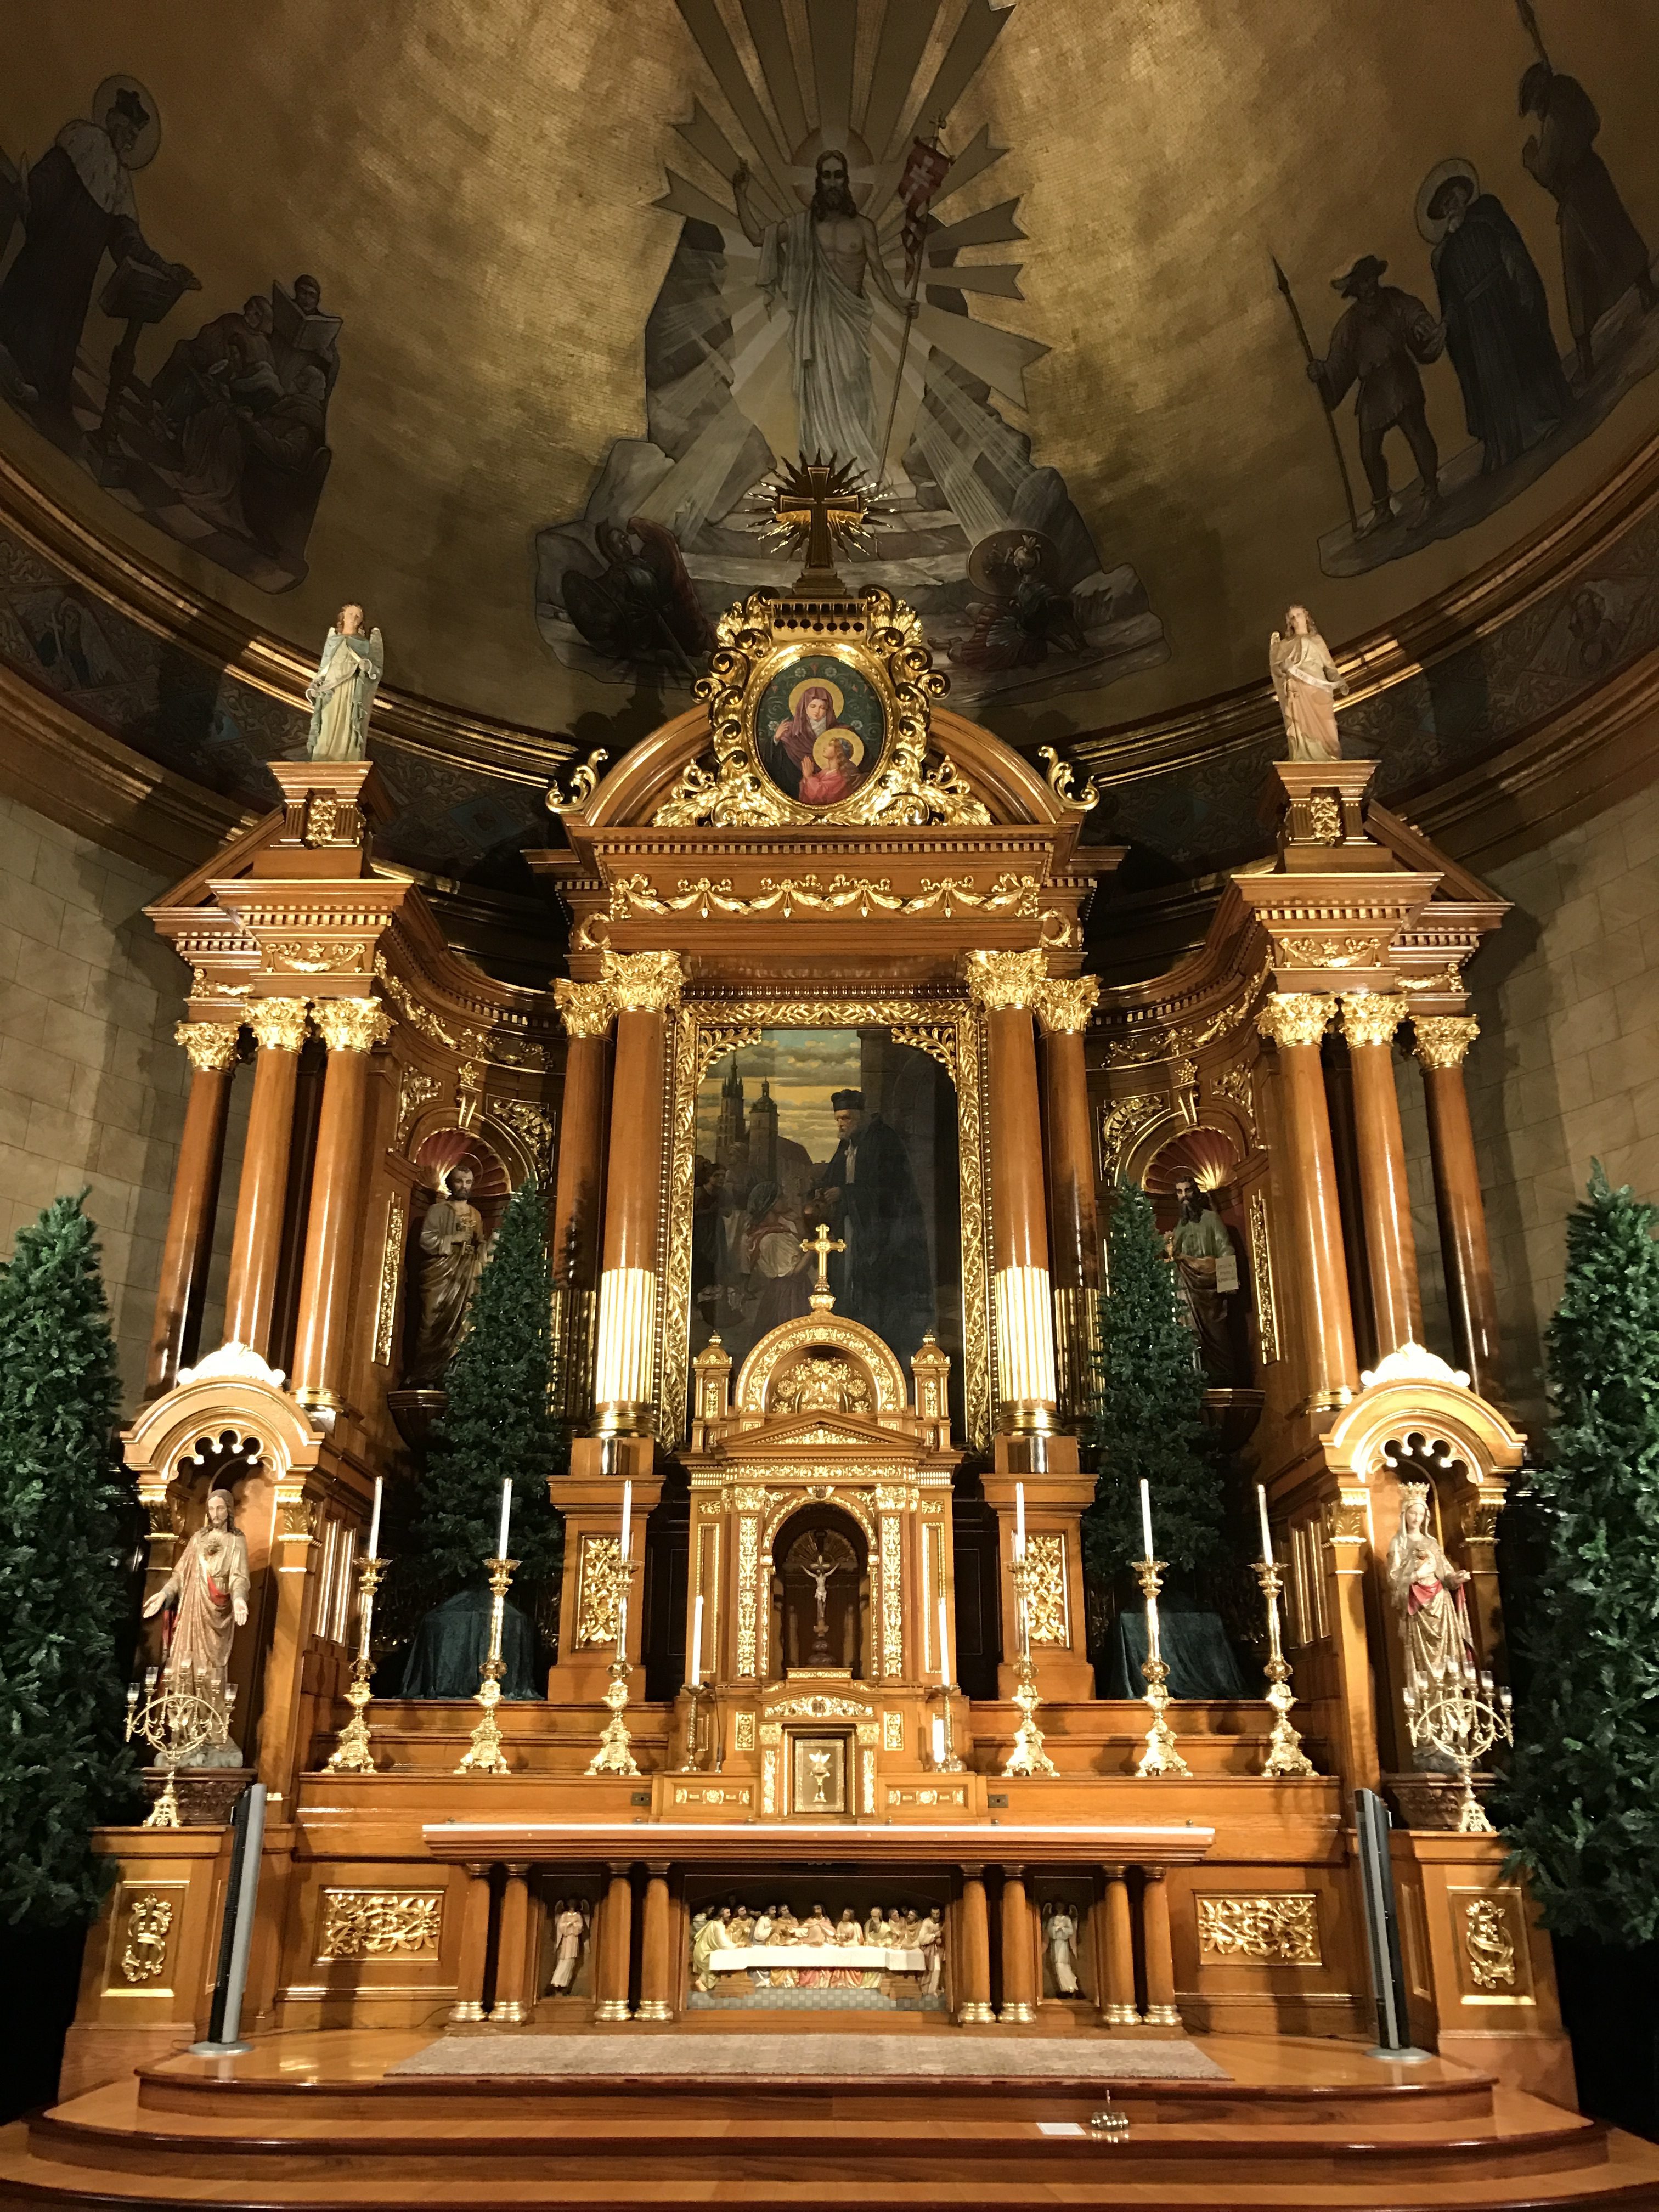 Full view of St. Cantius altar after gilding conservation